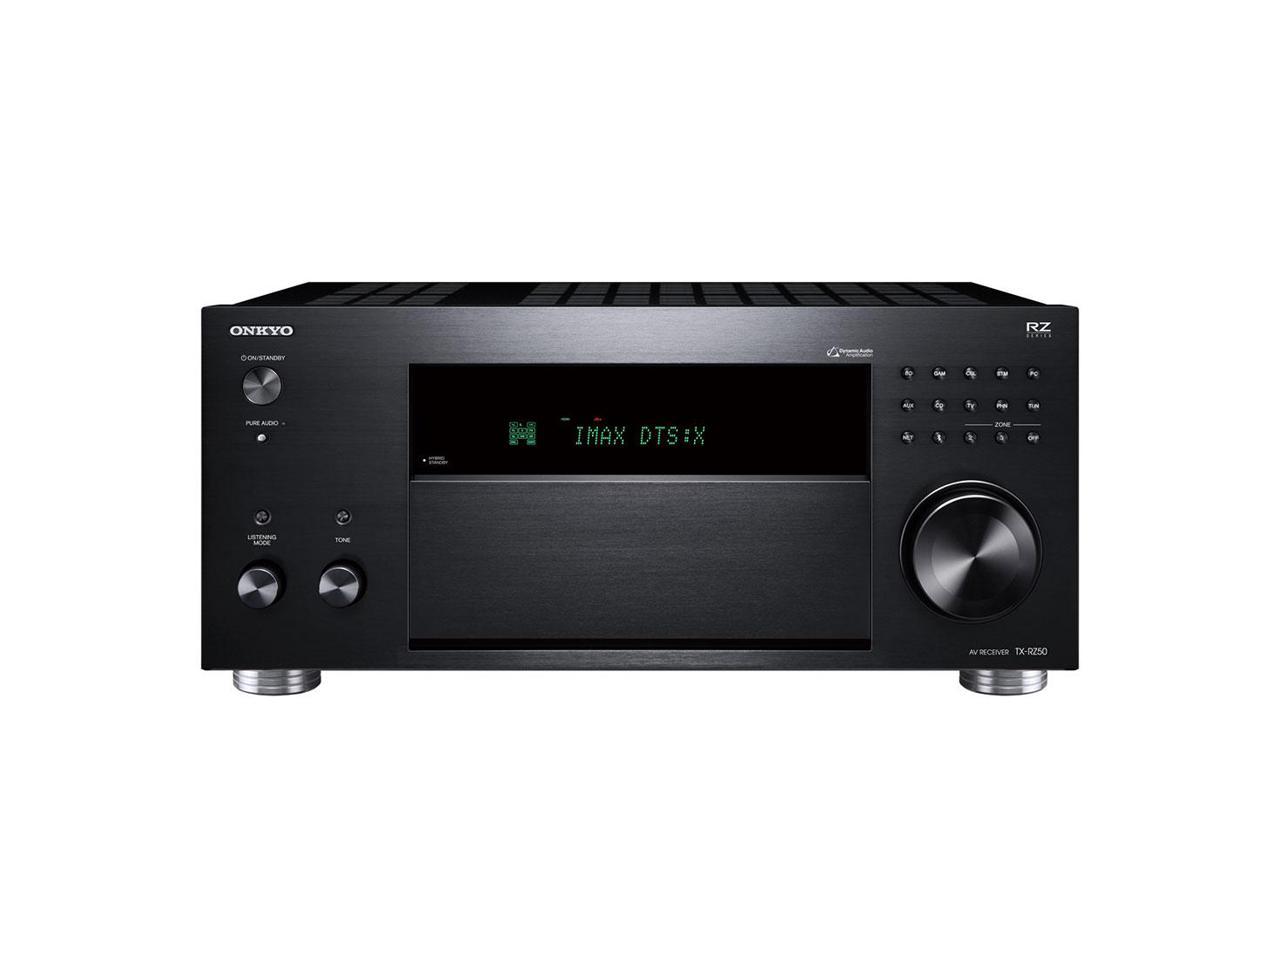 Onkyo TX-RZ50 9.2 Channel Network A/V Receiver + $400 Newegg Promo GC $1599 + free s/h